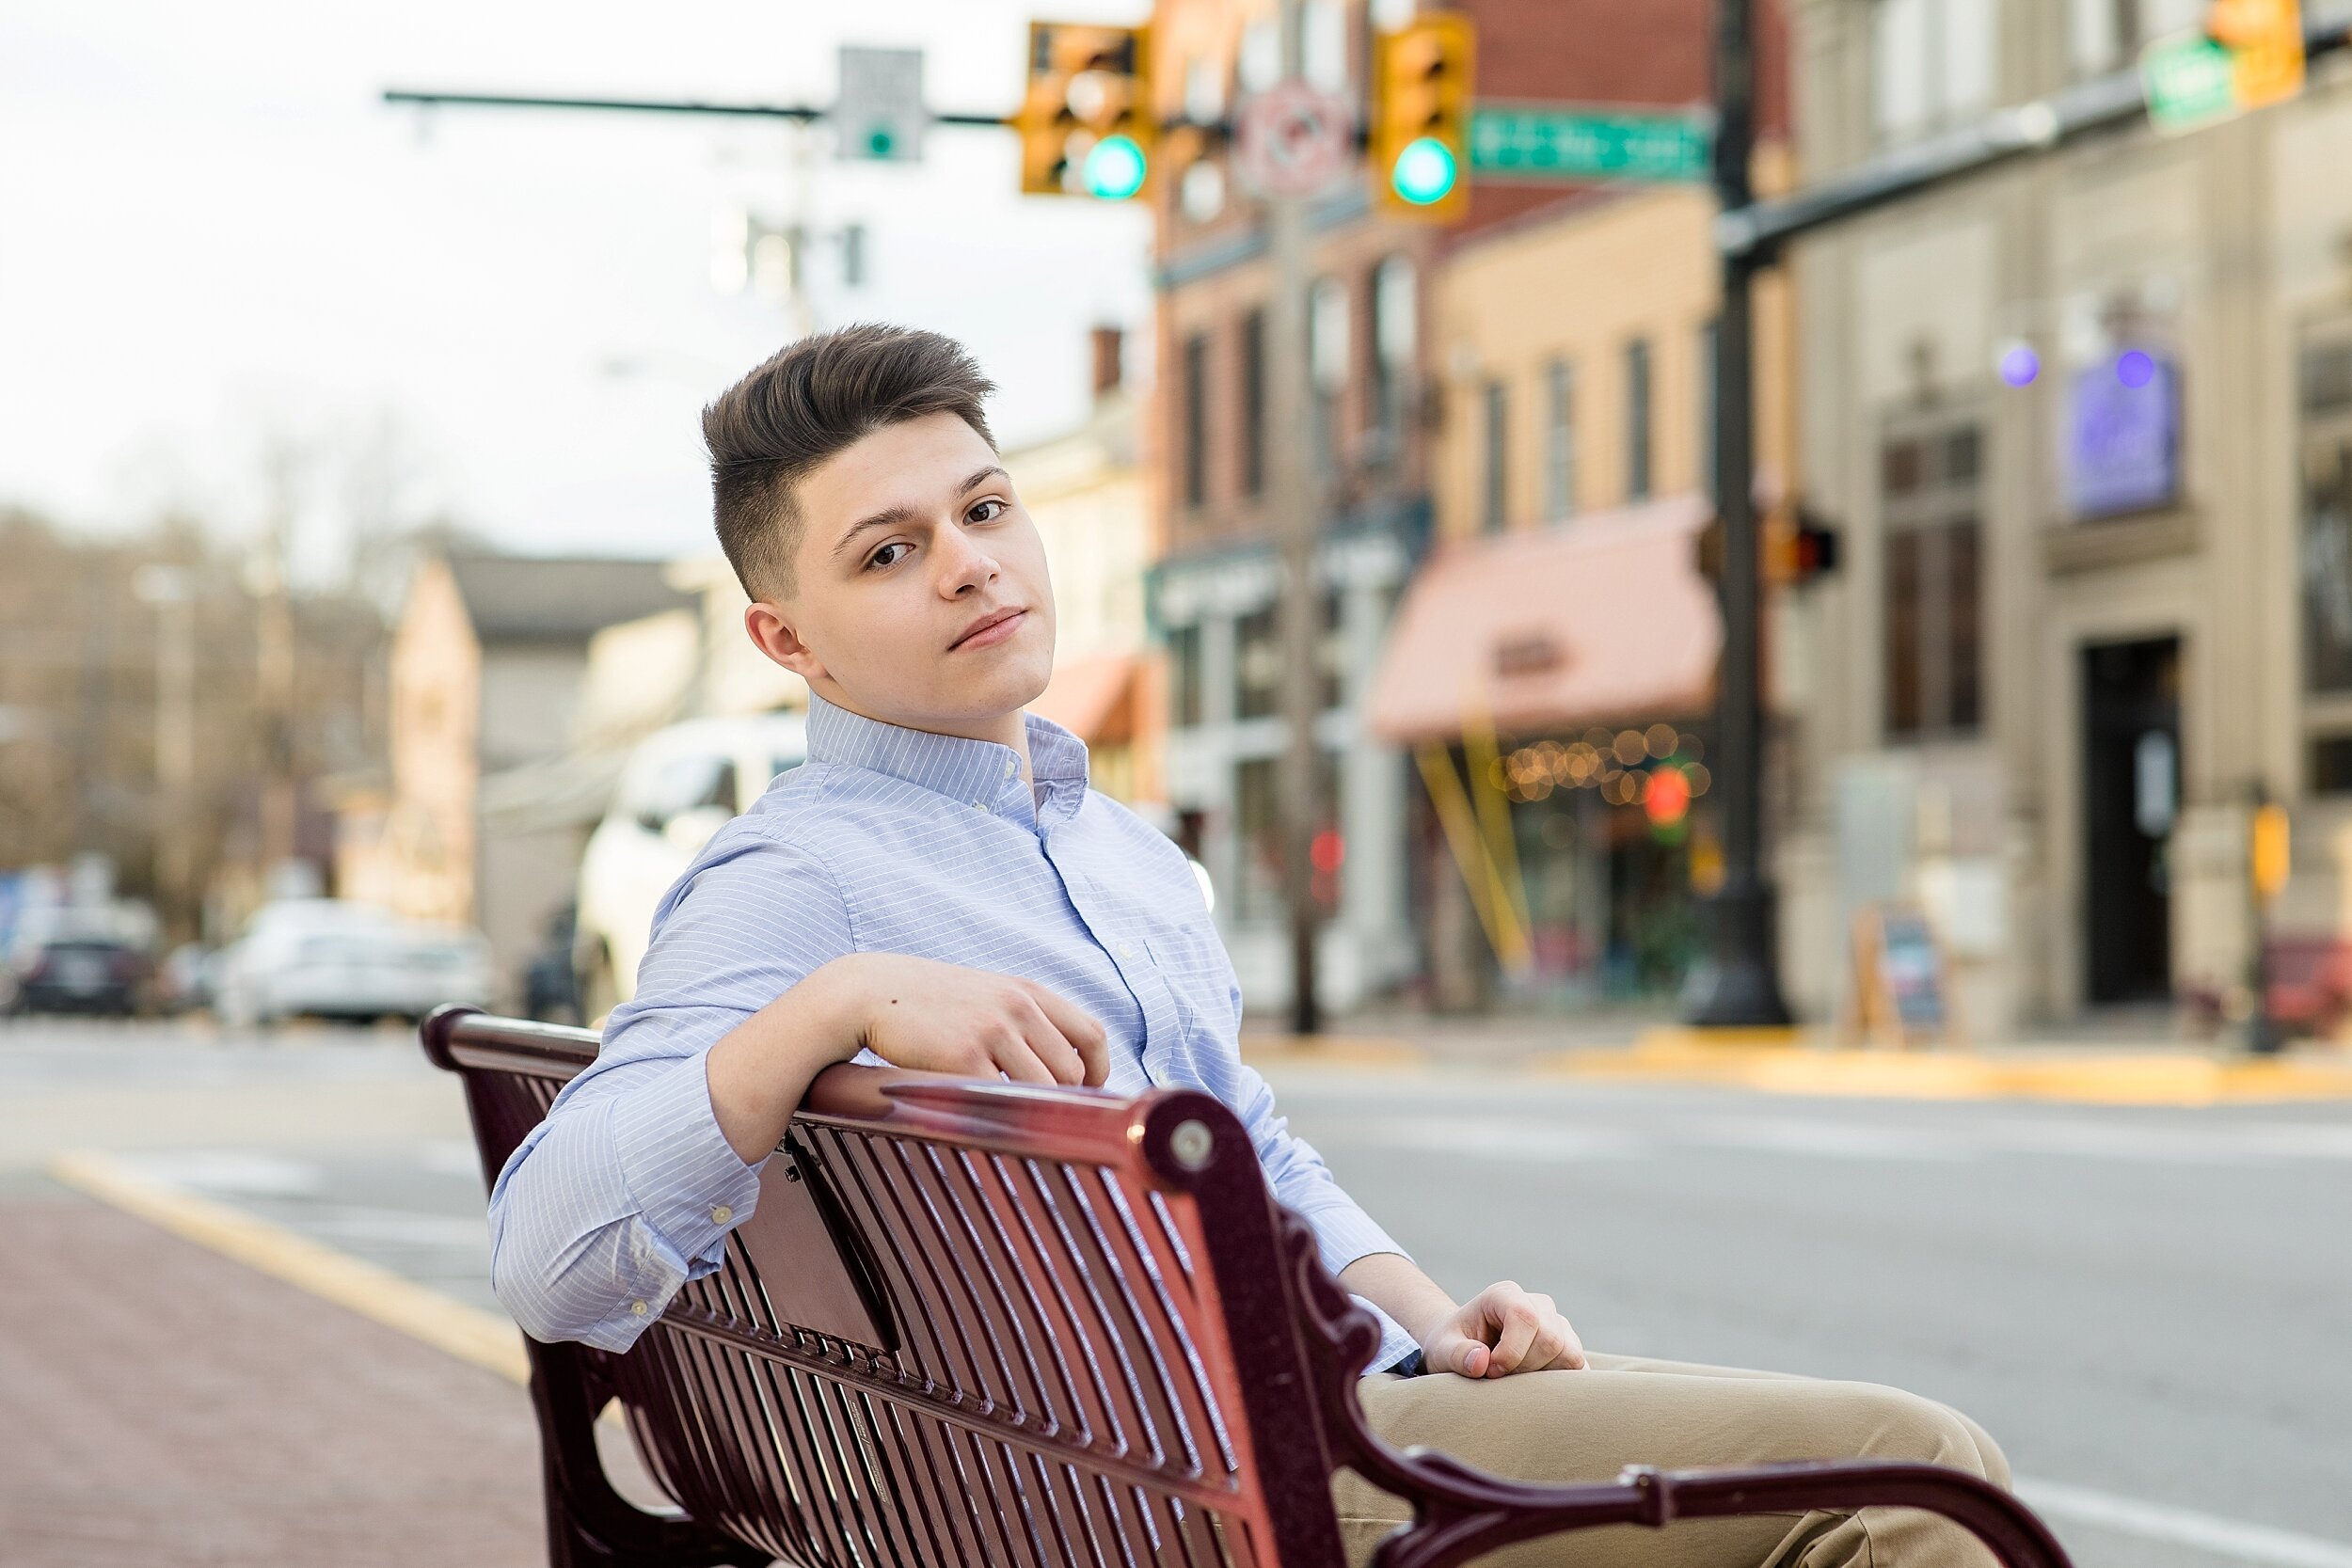 butler county senior photo locations, senior picture location ideas butler county, cranberry township senior photos, zelienople senior photos, mars senior photos, zelienople senior photos